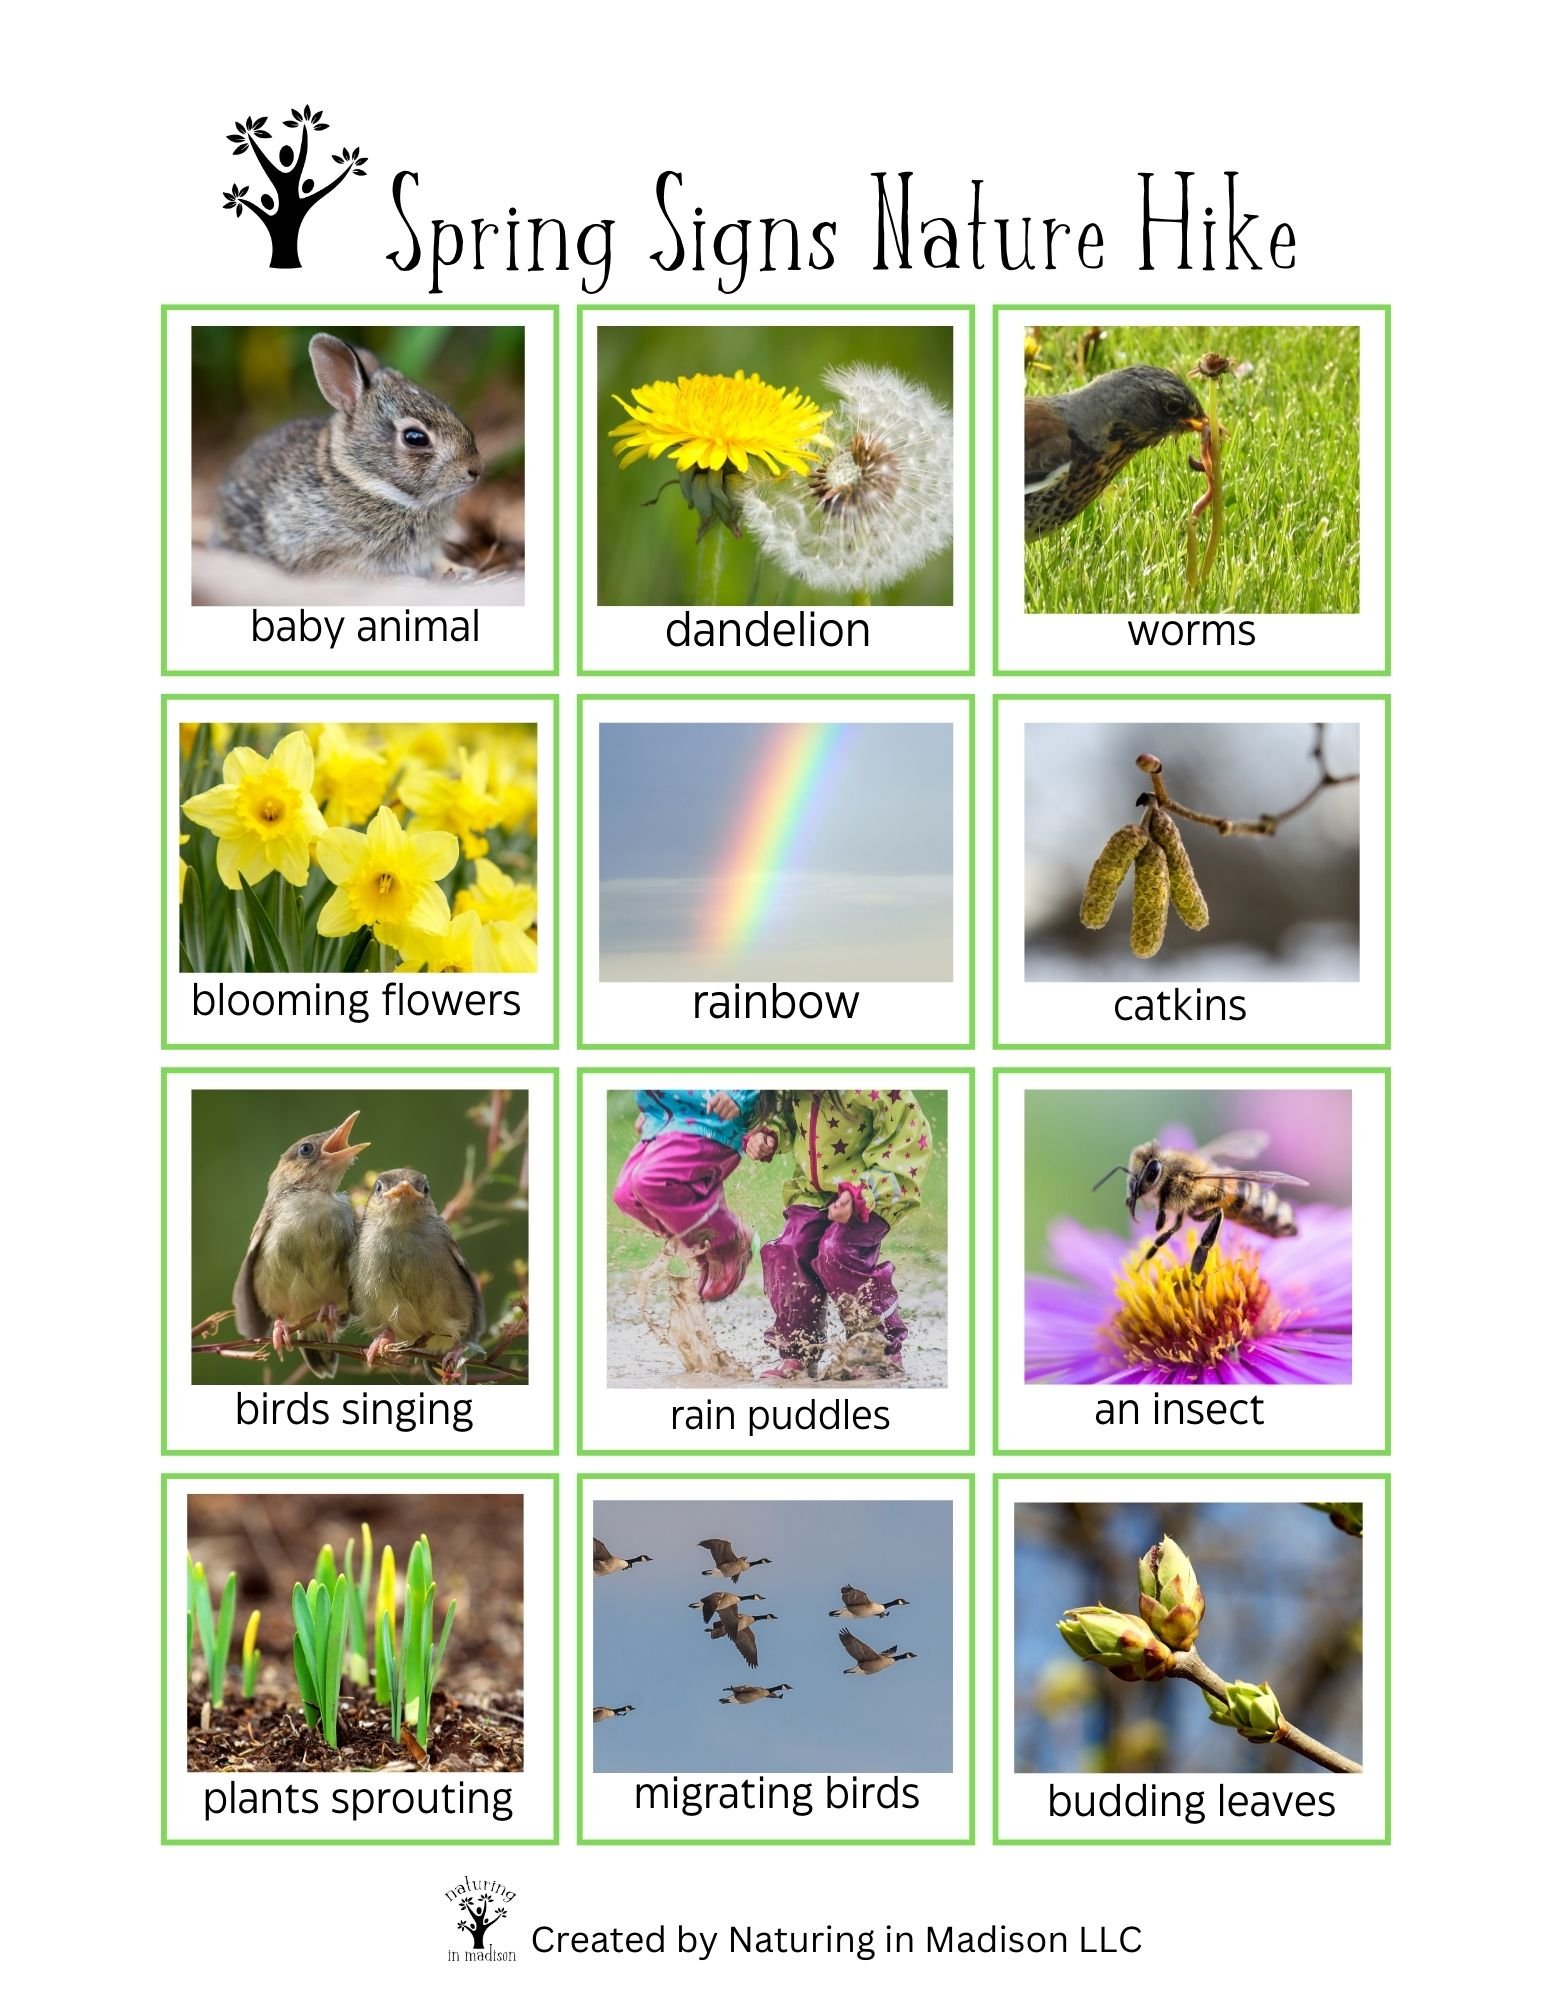 Spring has sprung! How many spring signs can you find?
Download your nature hike sheet here: https://naturinginmadison.com/naturing-blog-archive/2024/4/15-spring-nature-hike 

#springinwisconsin #outdoorfamilies #natureplay #childledplay #naturingtog